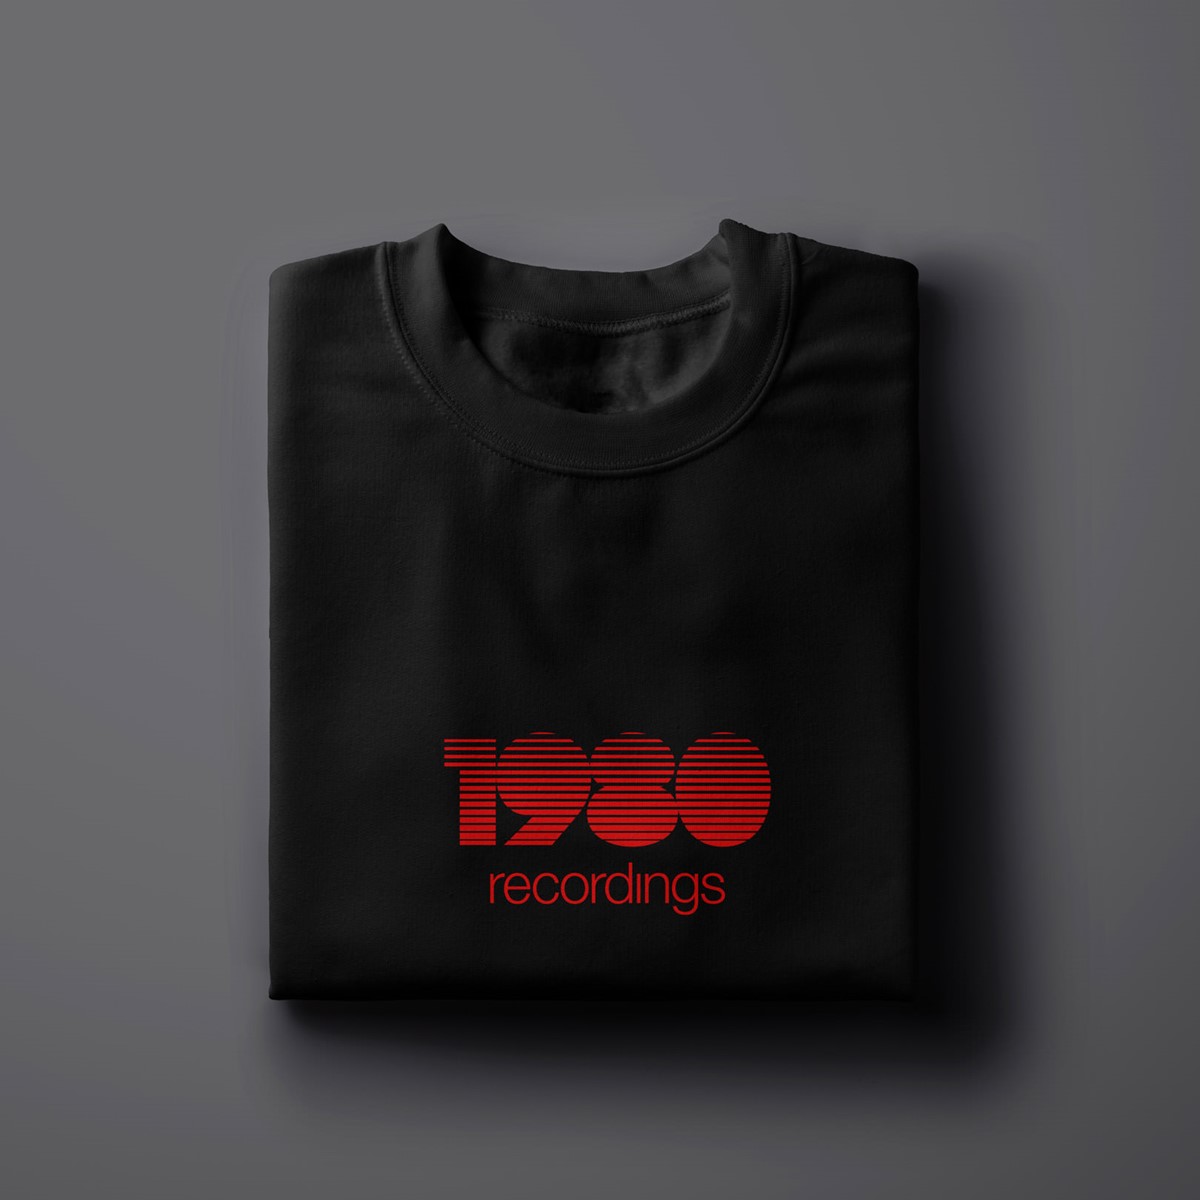 1980 Recordings. Logotype branded t-shirt mock-up. Brand identity design by Superfried.